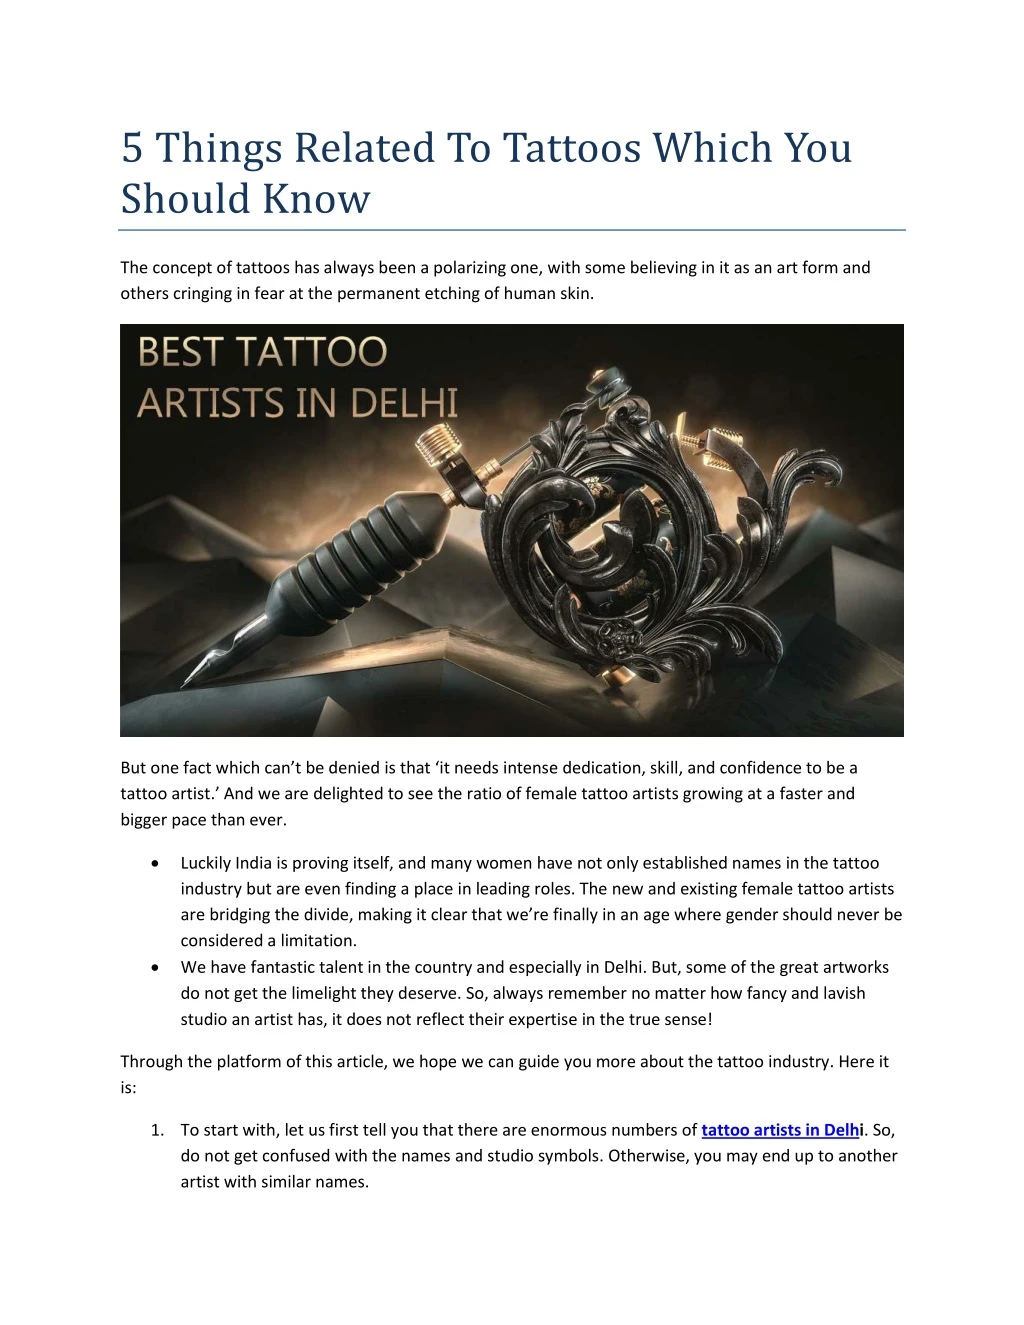 5 things related to tattoos which you should know